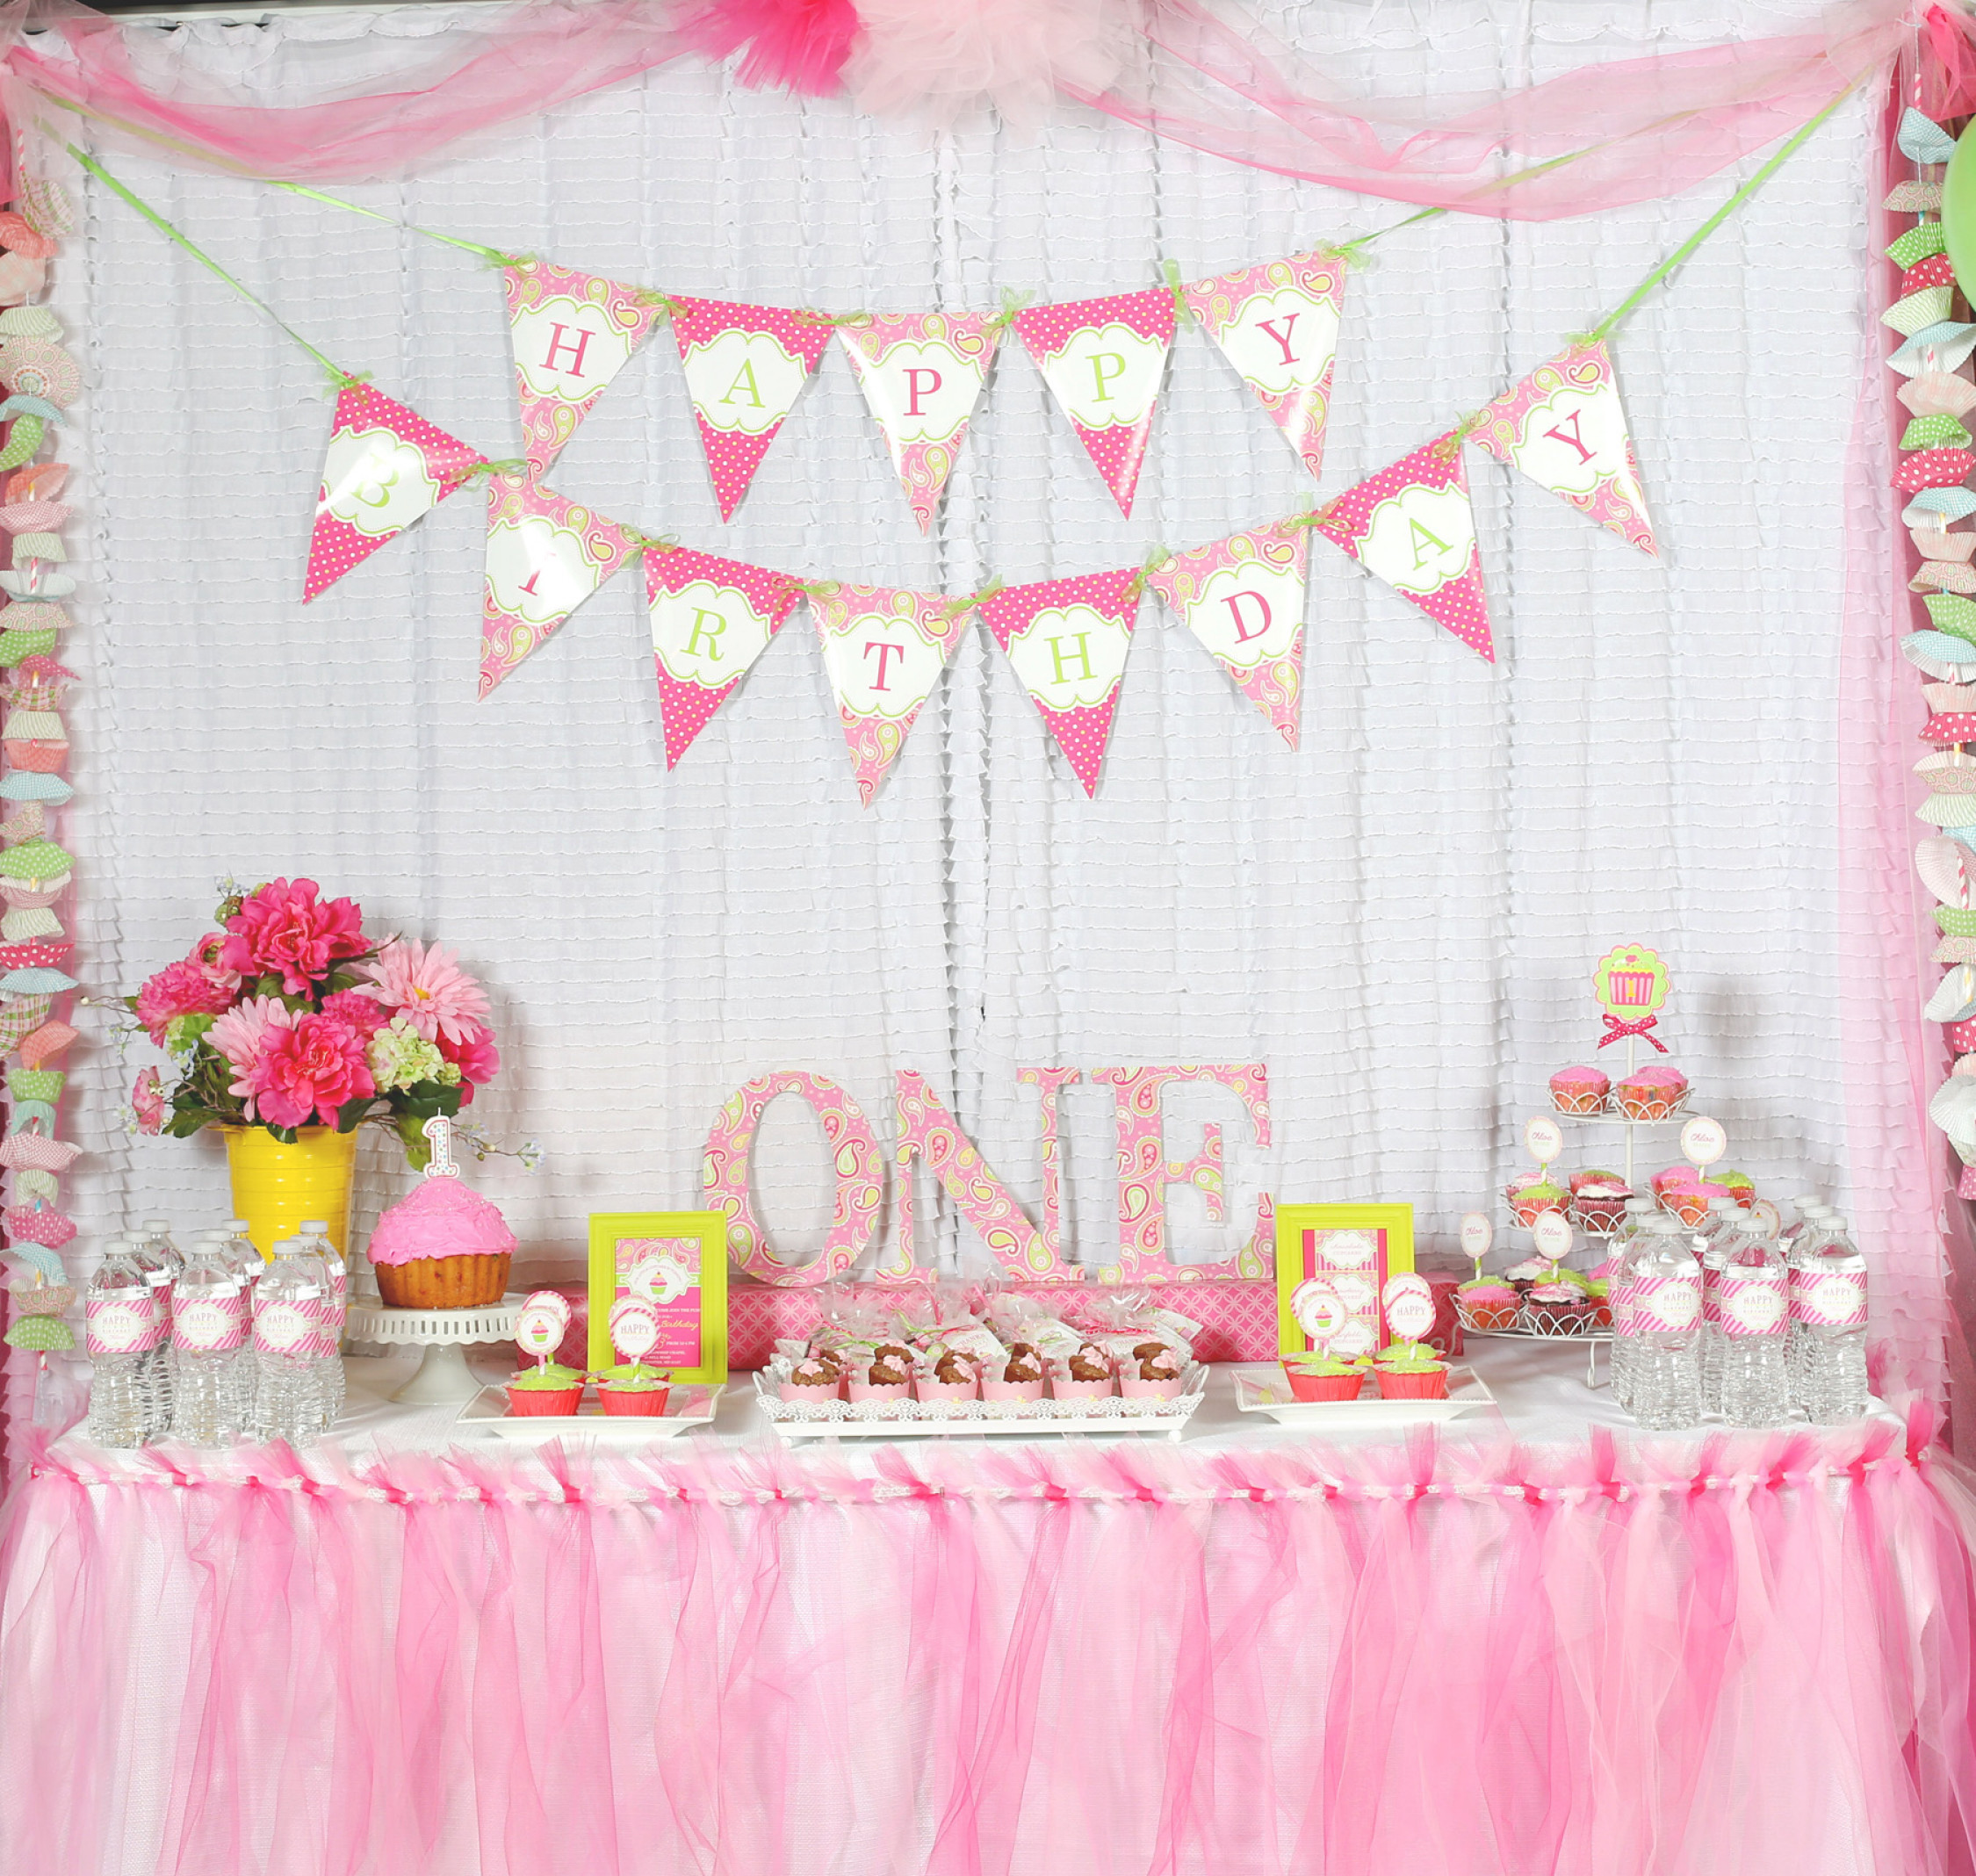 1st Birthday Decorations Girl
 A Cupcake Themed 1st Birthday party with Paisley and Polka